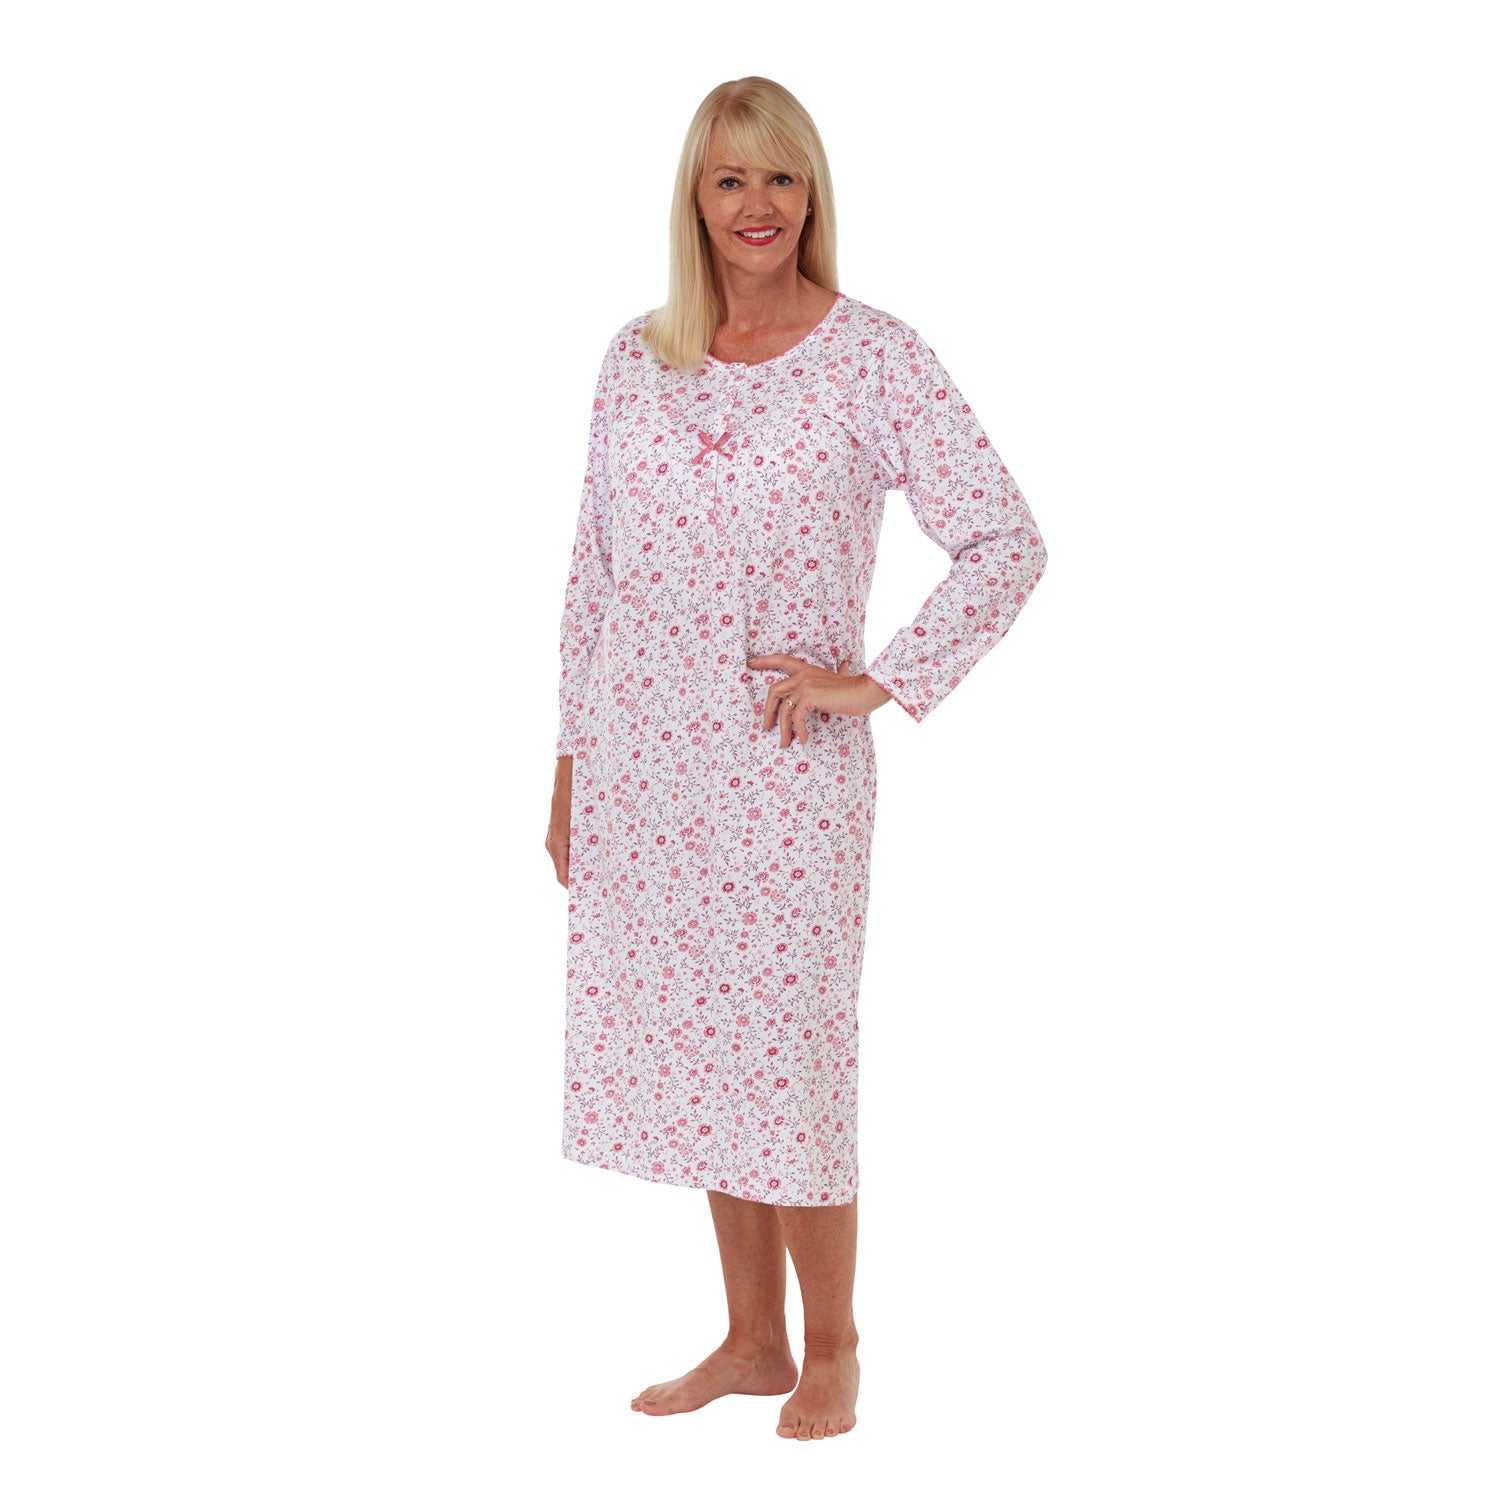 Marlon Danielle Floral Print 100% Cotton Jersey Long Sleeve Nightdress - Rose 1 Shaws Department Stores